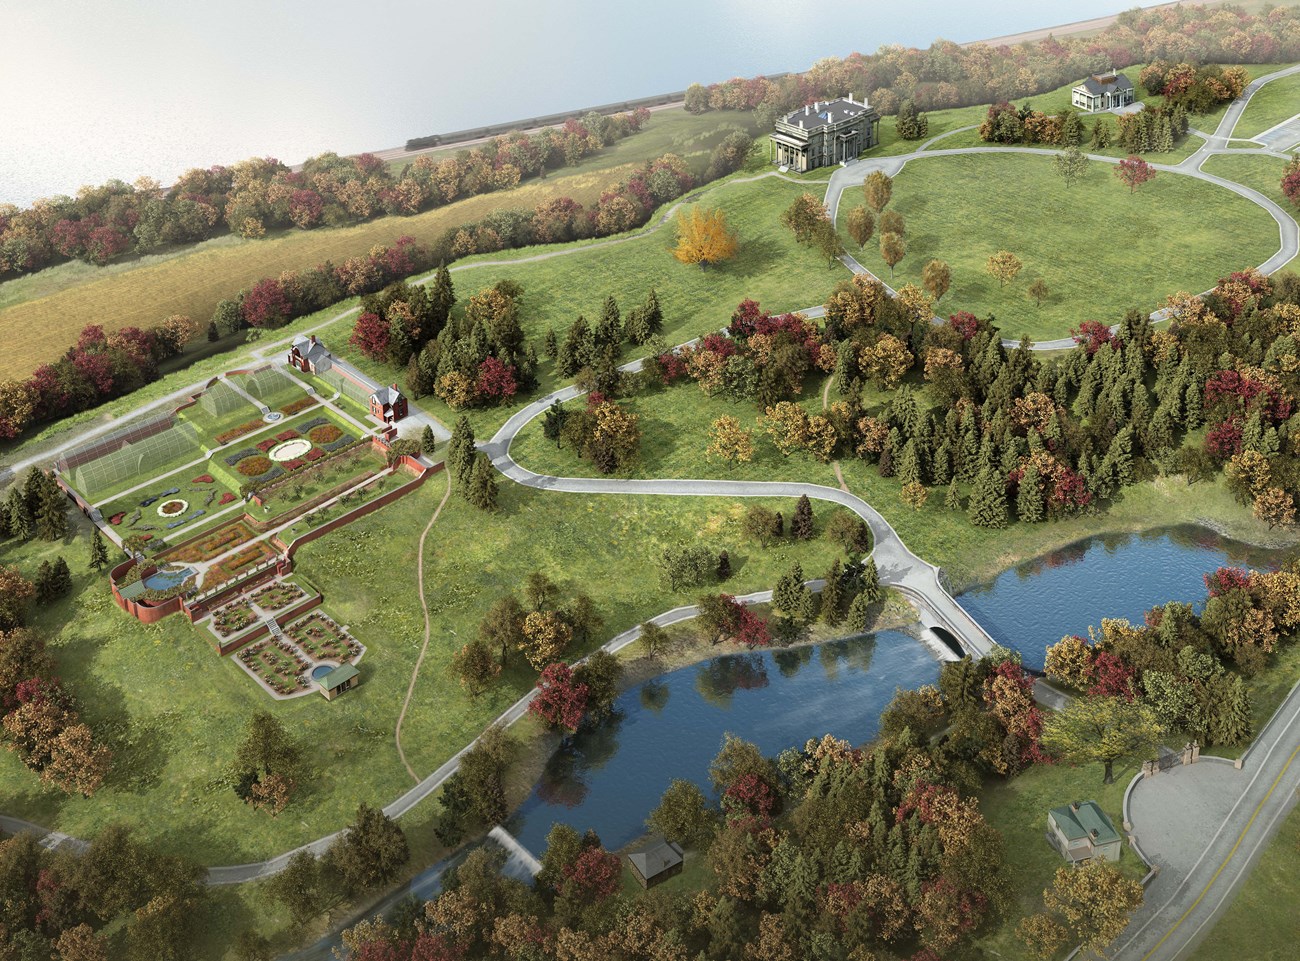 An artist's rendering of a birdseye view of the park.